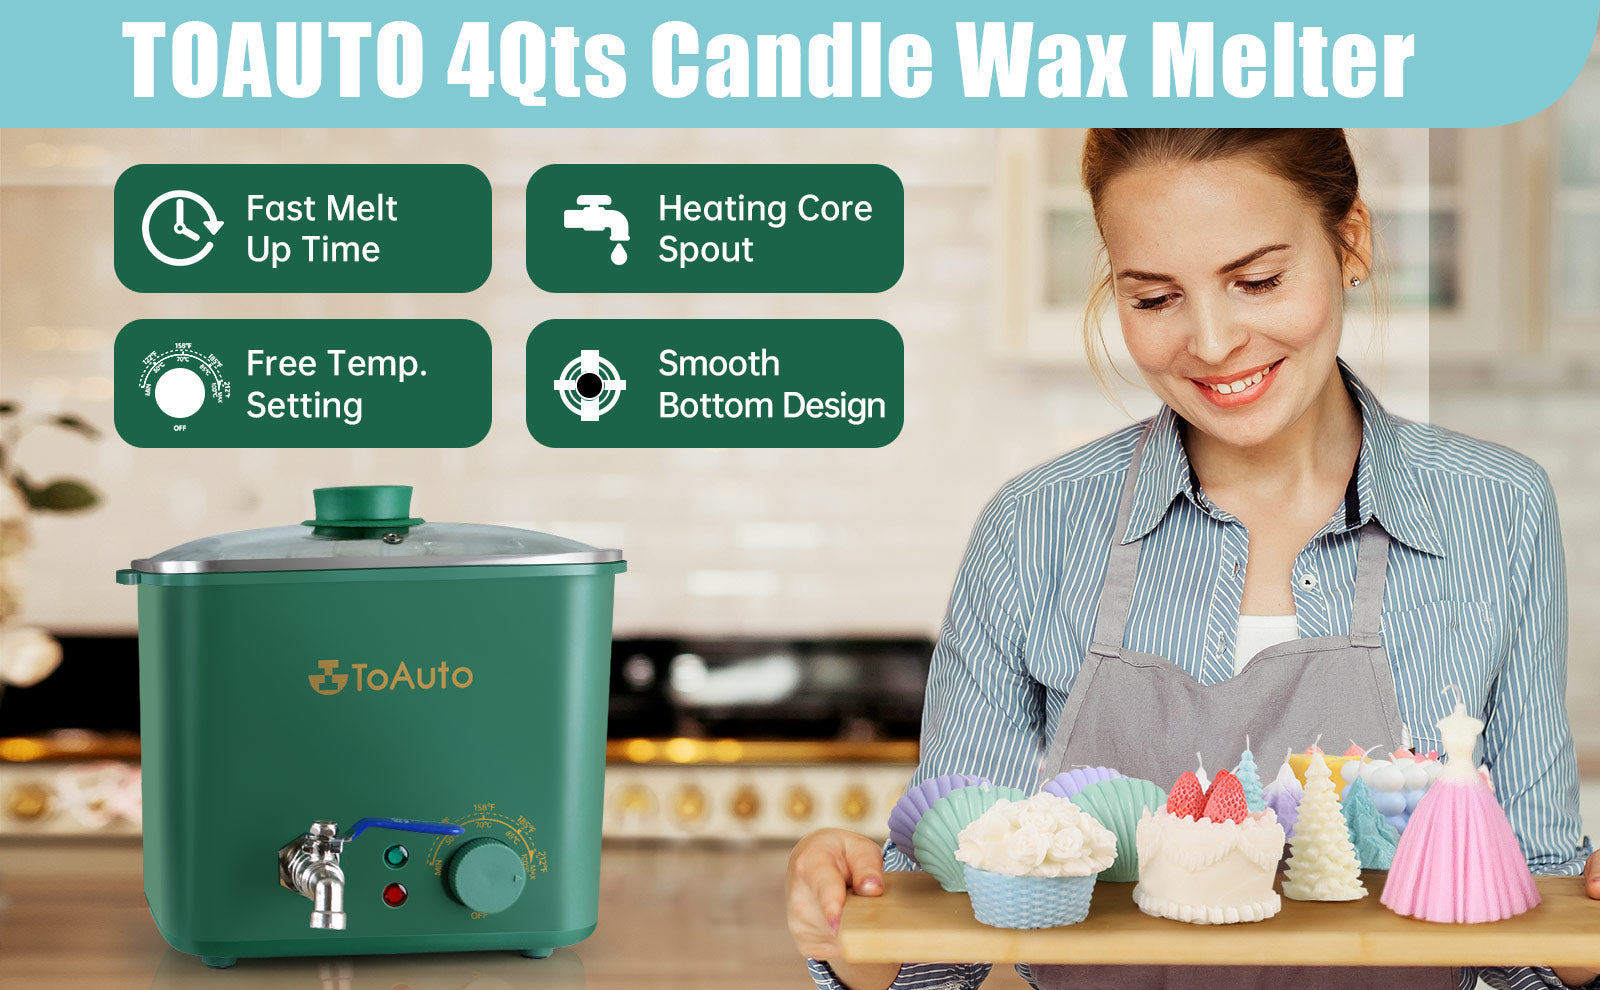 Electric Wax Melter for Candle Making Supplies, Holds 6 Qt of Melted Wax,  Electric Wax Melting Pot for Soy Wax with Quick-Pour Valve